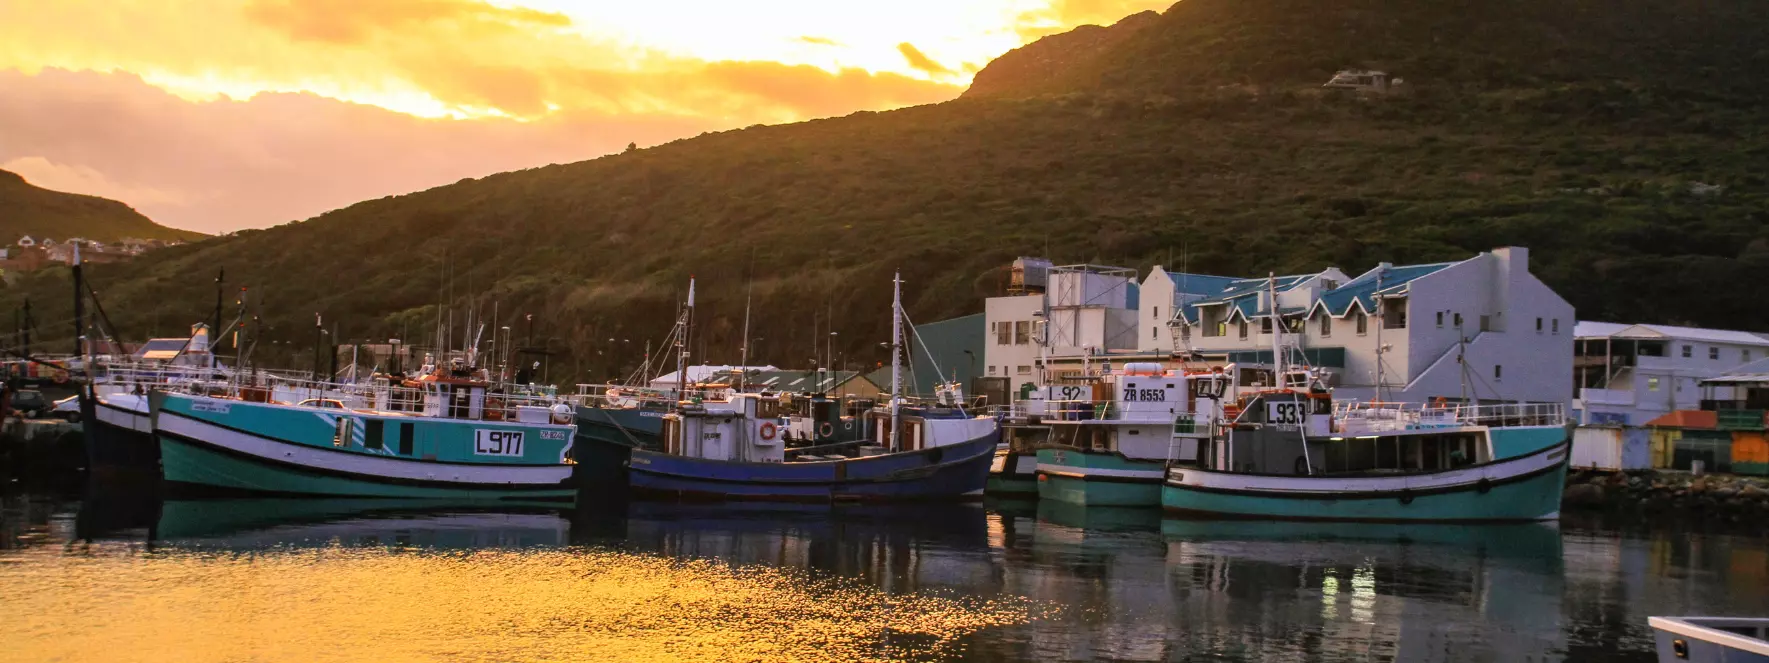 hout bay harbour Things to Do in Cape Town Under R200